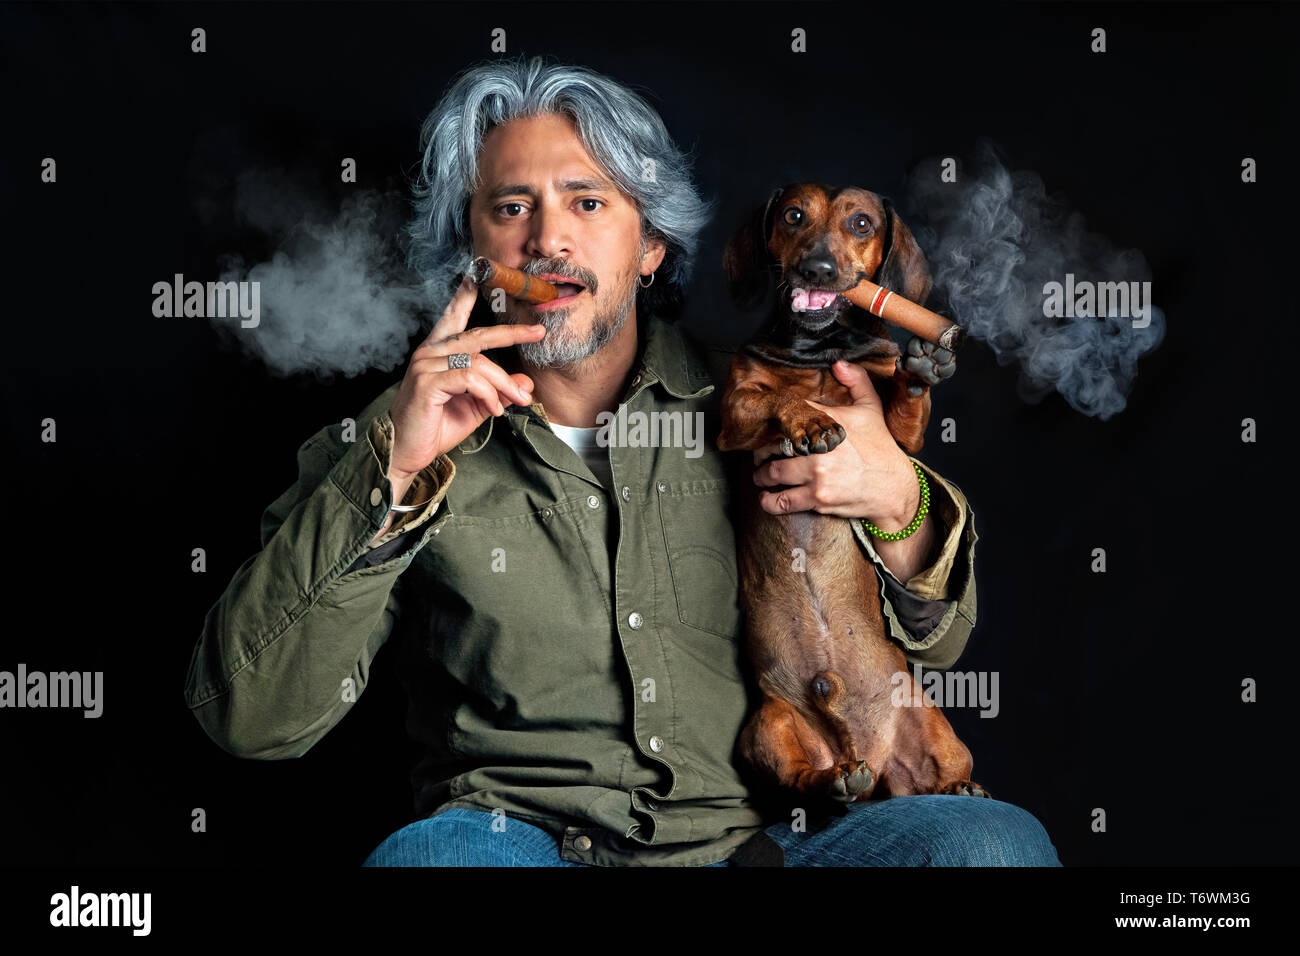 Funny portrait of middle aged man with sausage dog smoking cigars Stock Photo